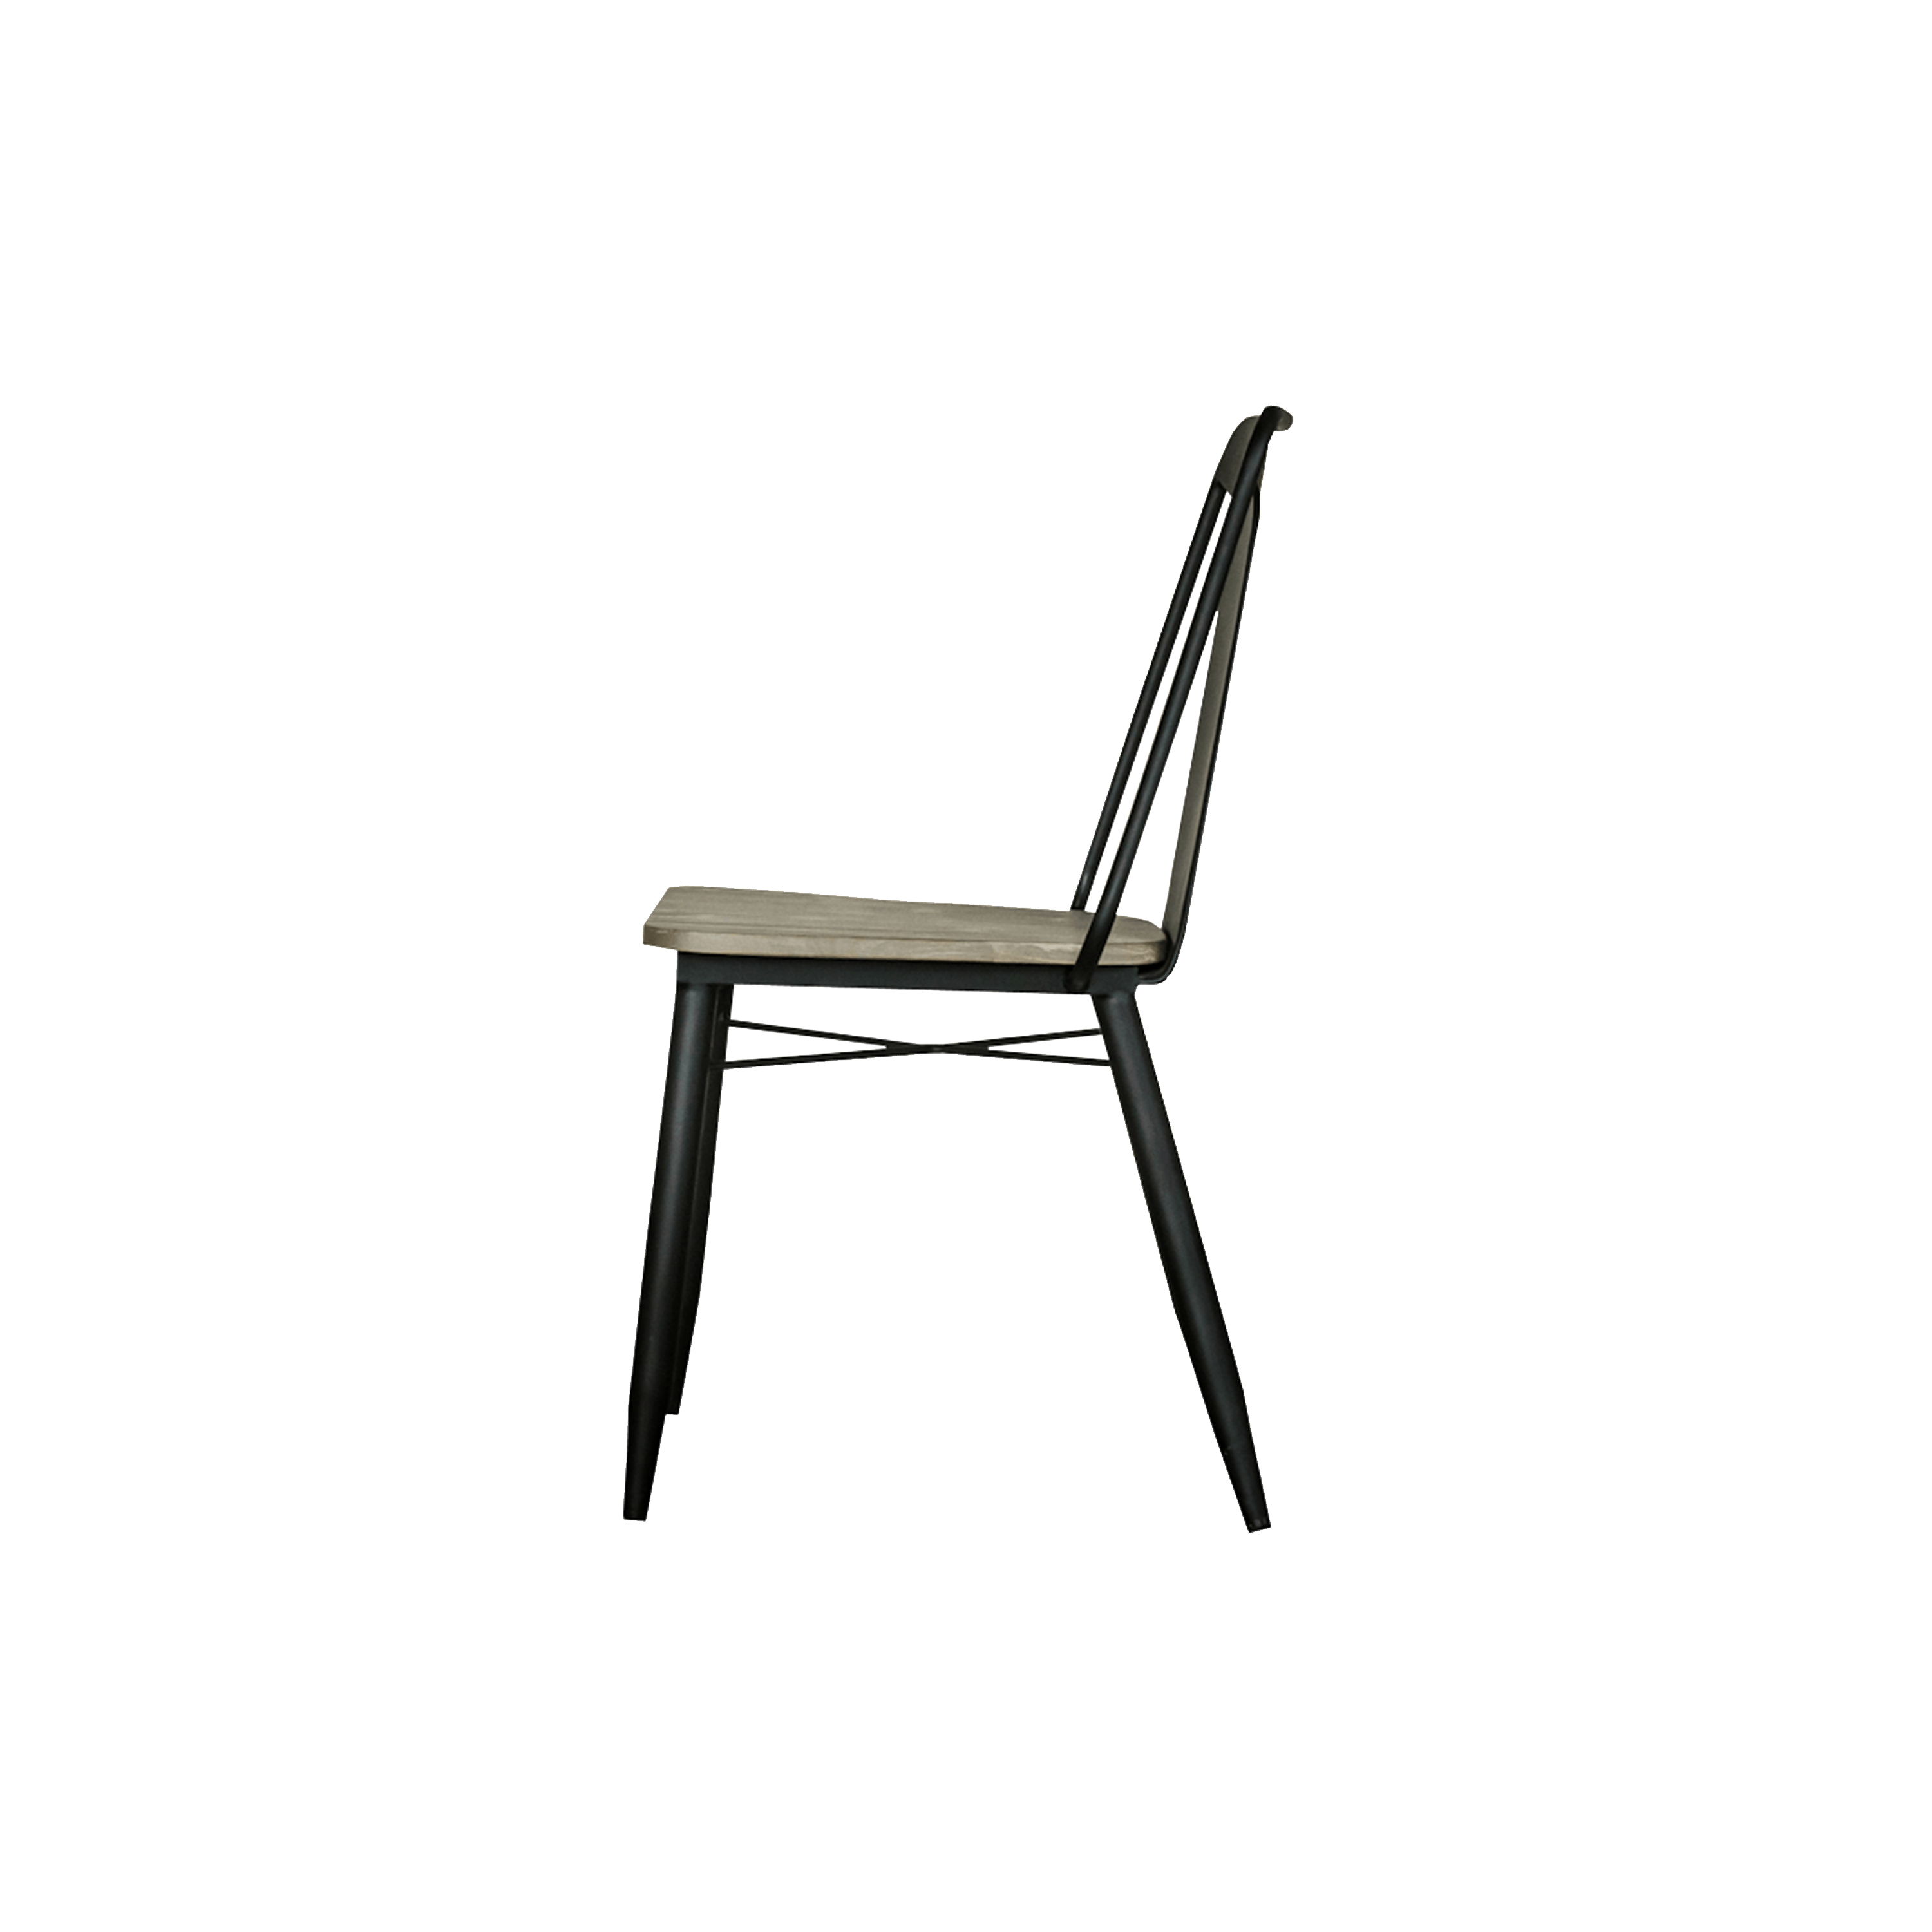 Buy Dining Chairs Online in Singapore | HipVan